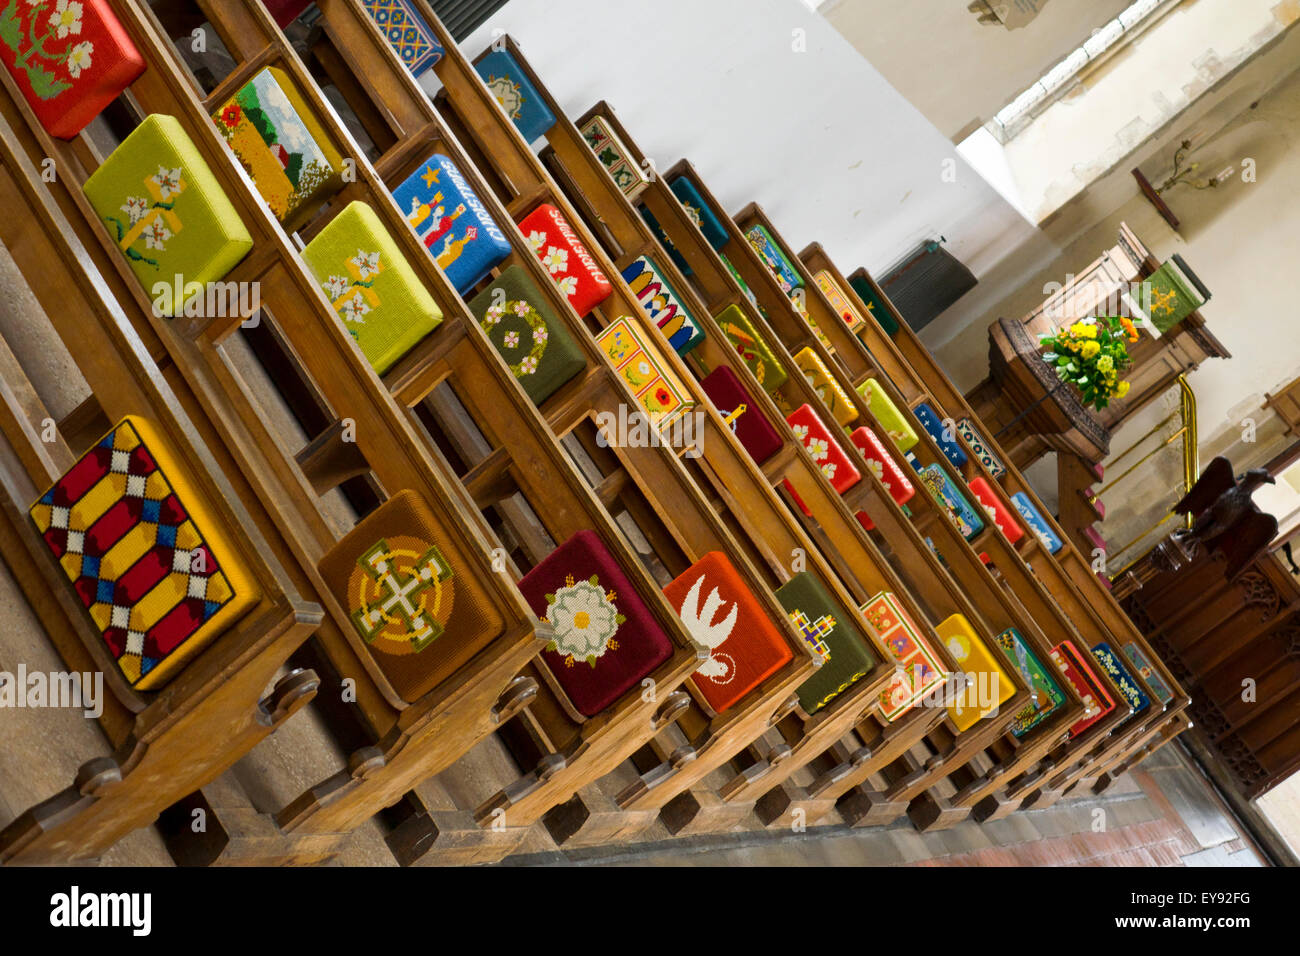 church pews and kneelers Stock Photo